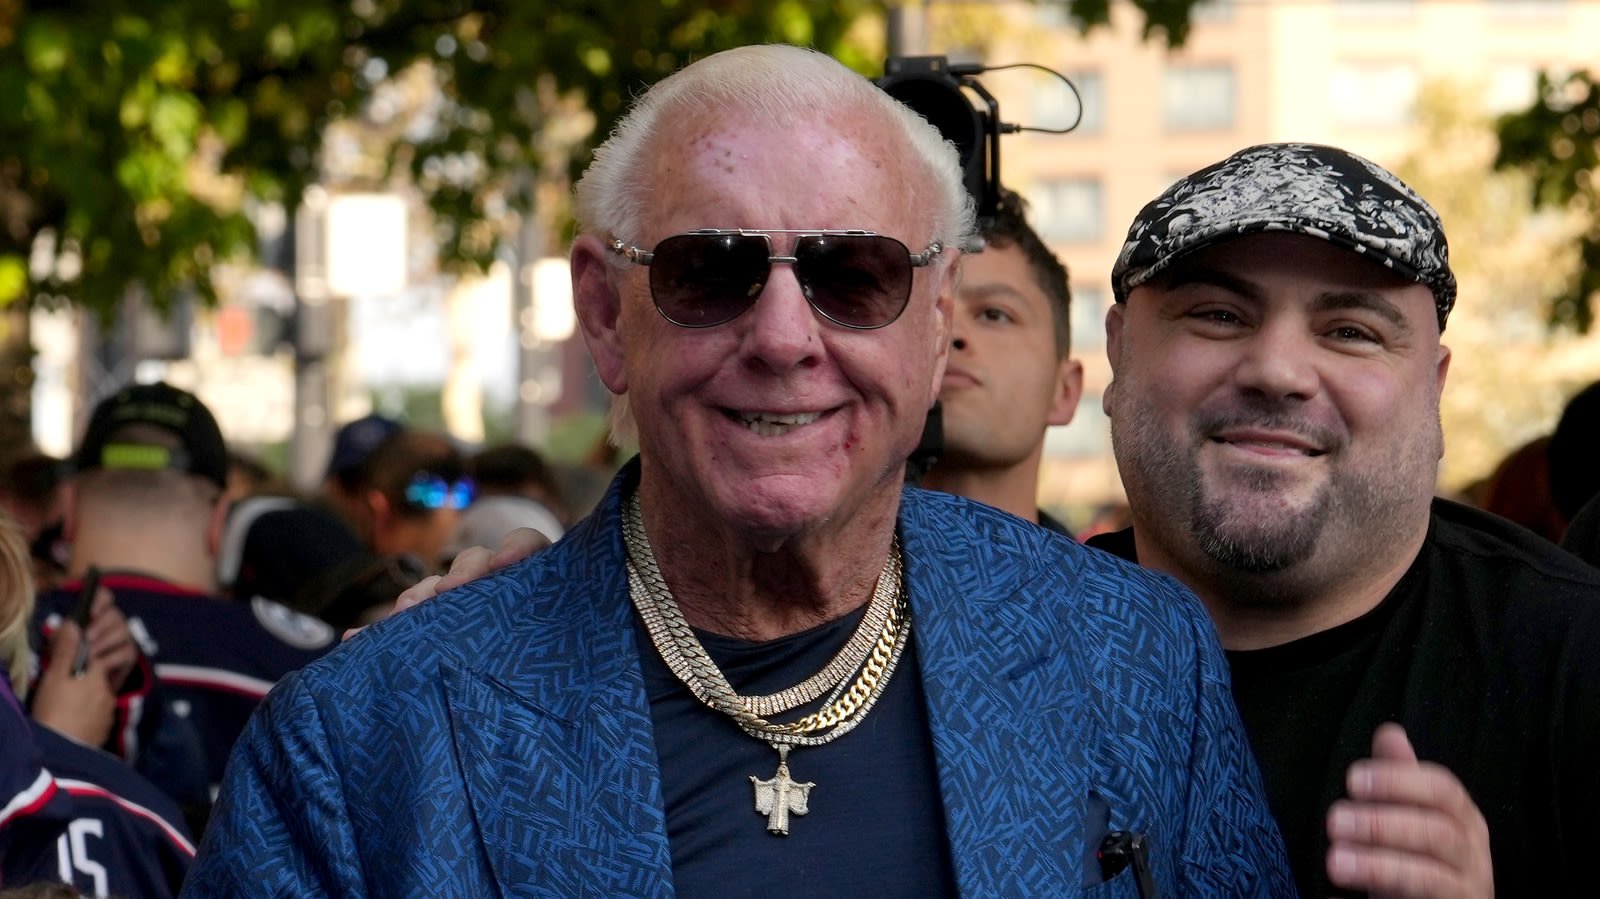 Ric Flair Reportedly Considering Legal Action Following Florida Restaurant Incident - Wrestling Inc.